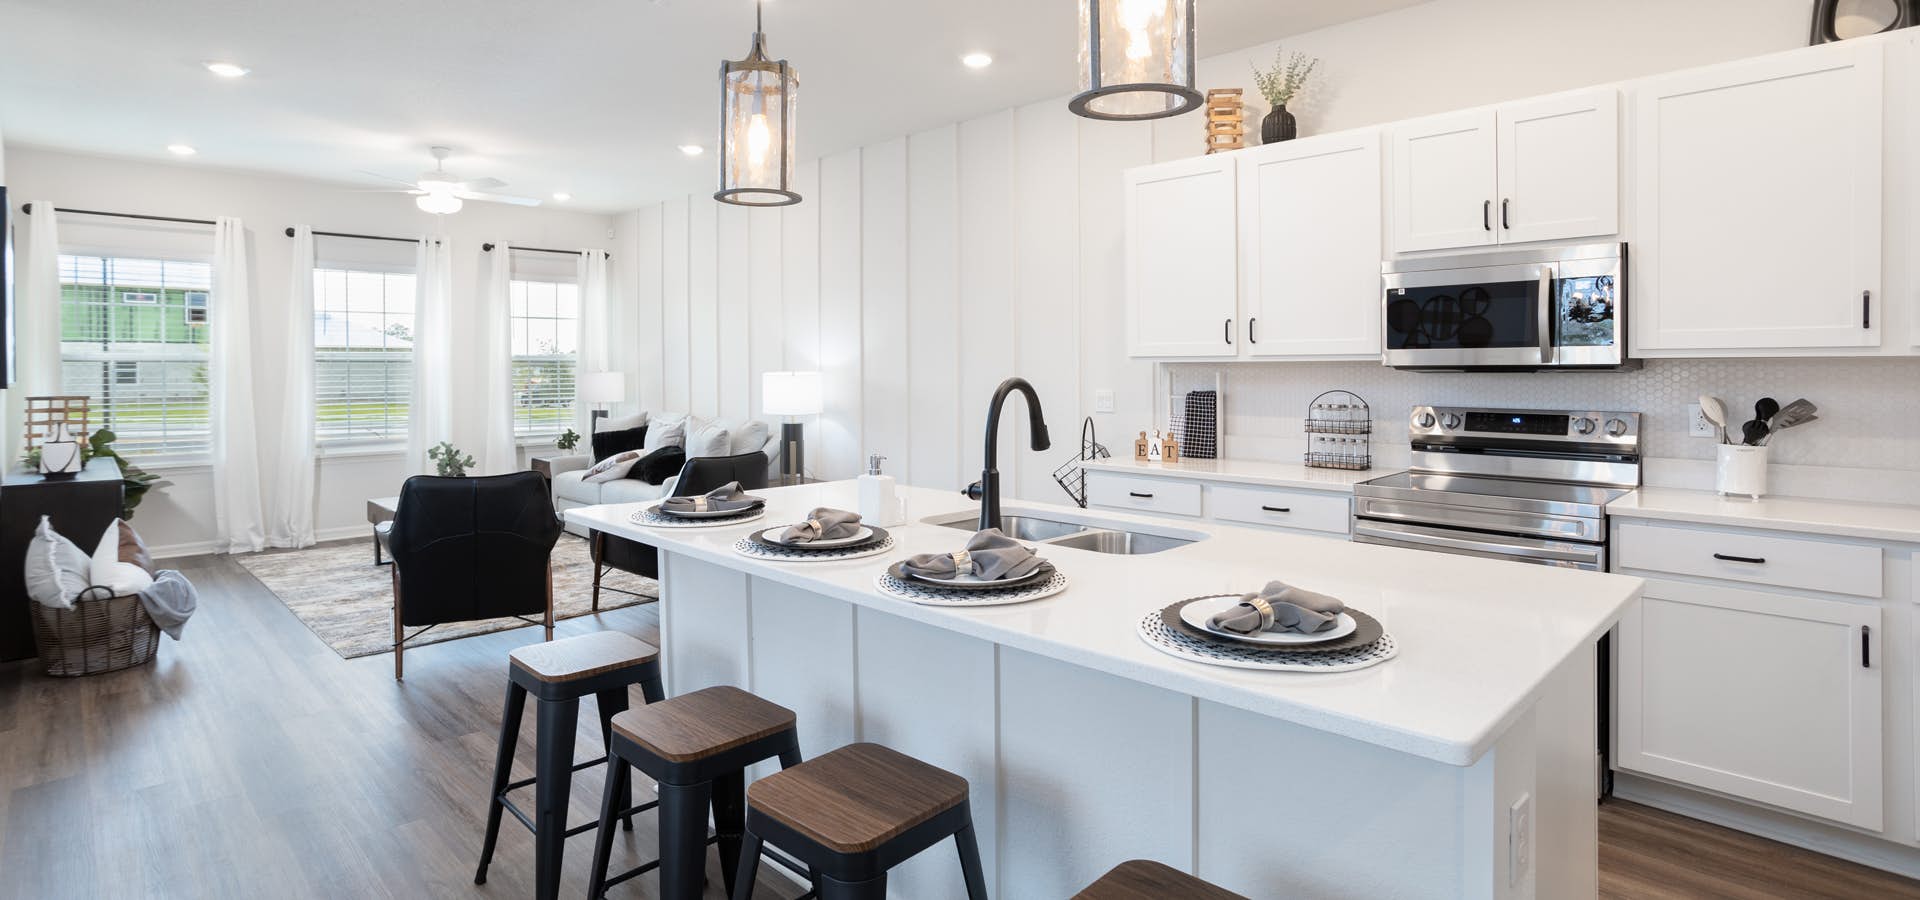 Modern farmhouse style kitchen decor with white cabinets and contrasting dark metal hardware